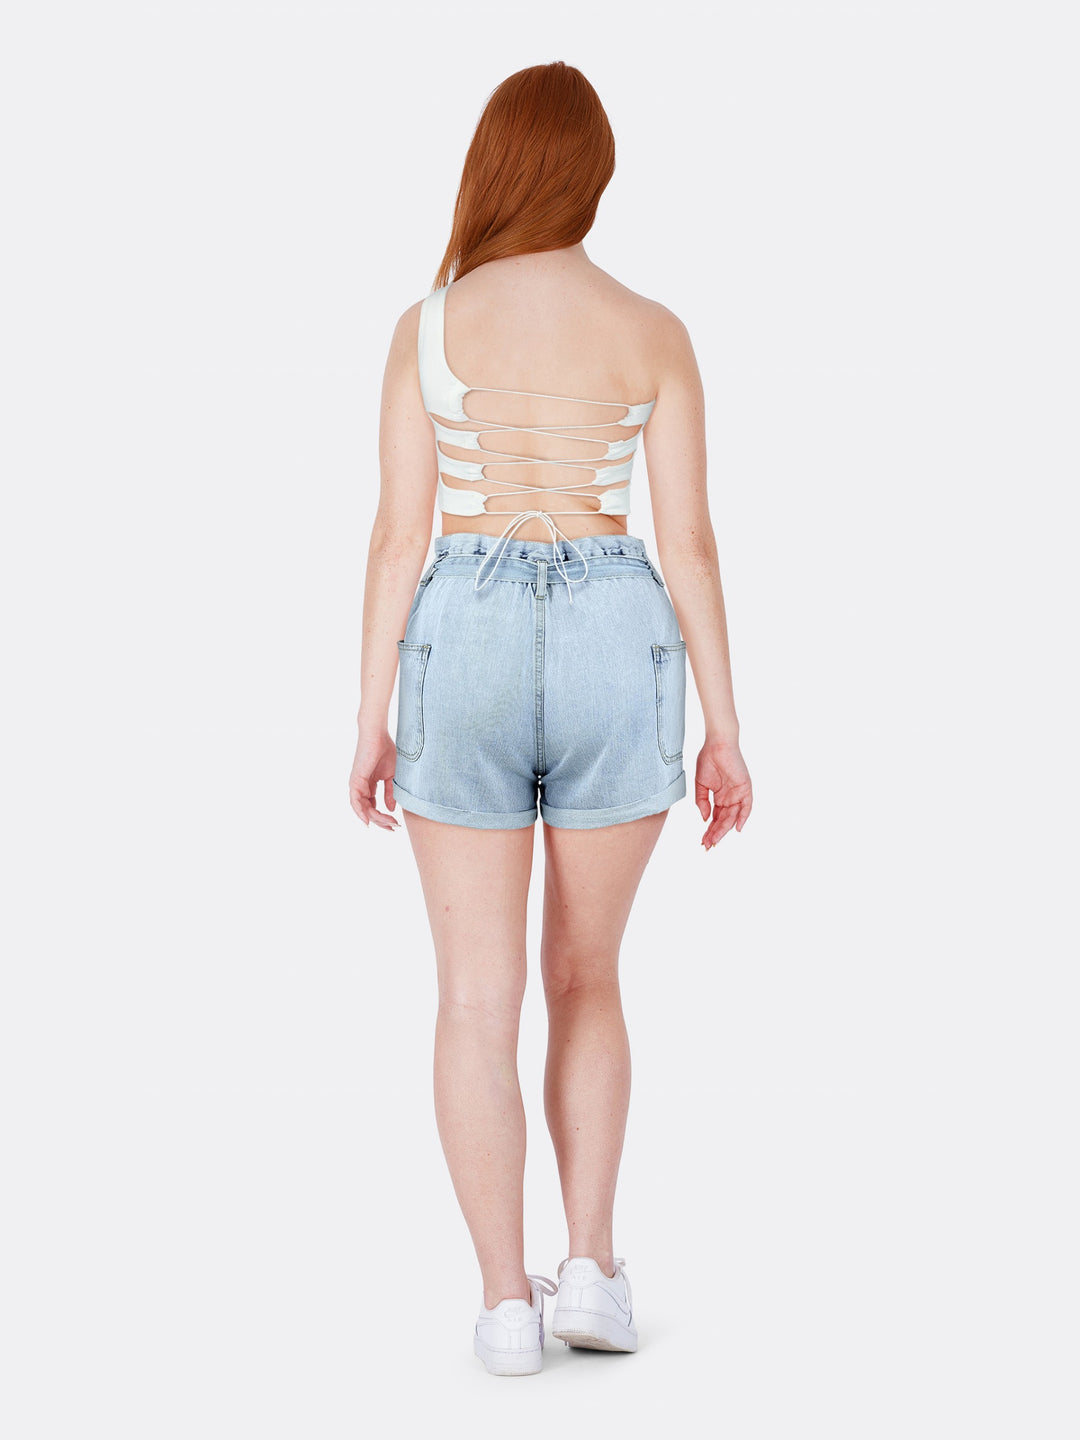 Single Shoulder Top with Criss-Cross Straps at the Back White Back